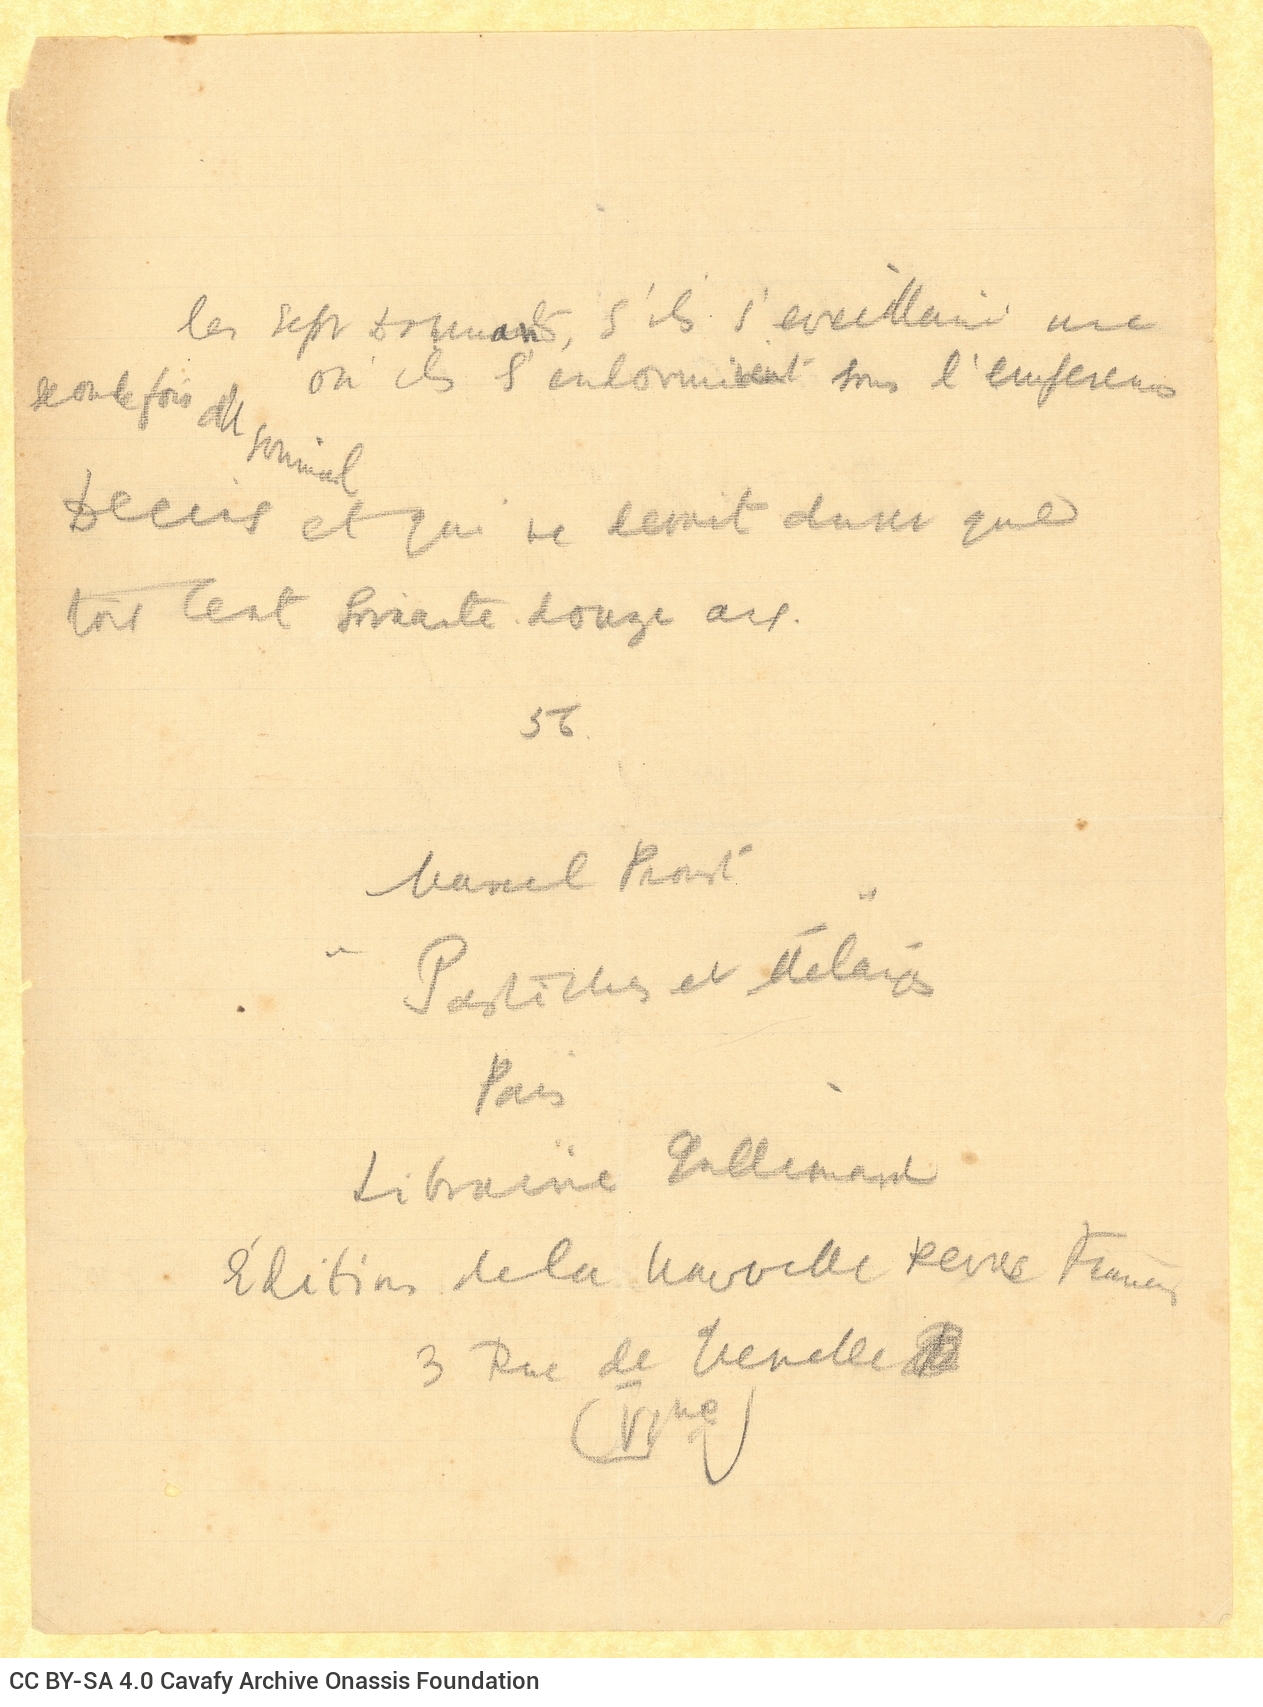 Handwritten note with a quote from a work by Marcel Proust and bibliographical reference, on one side of a ruled sheet. Bl